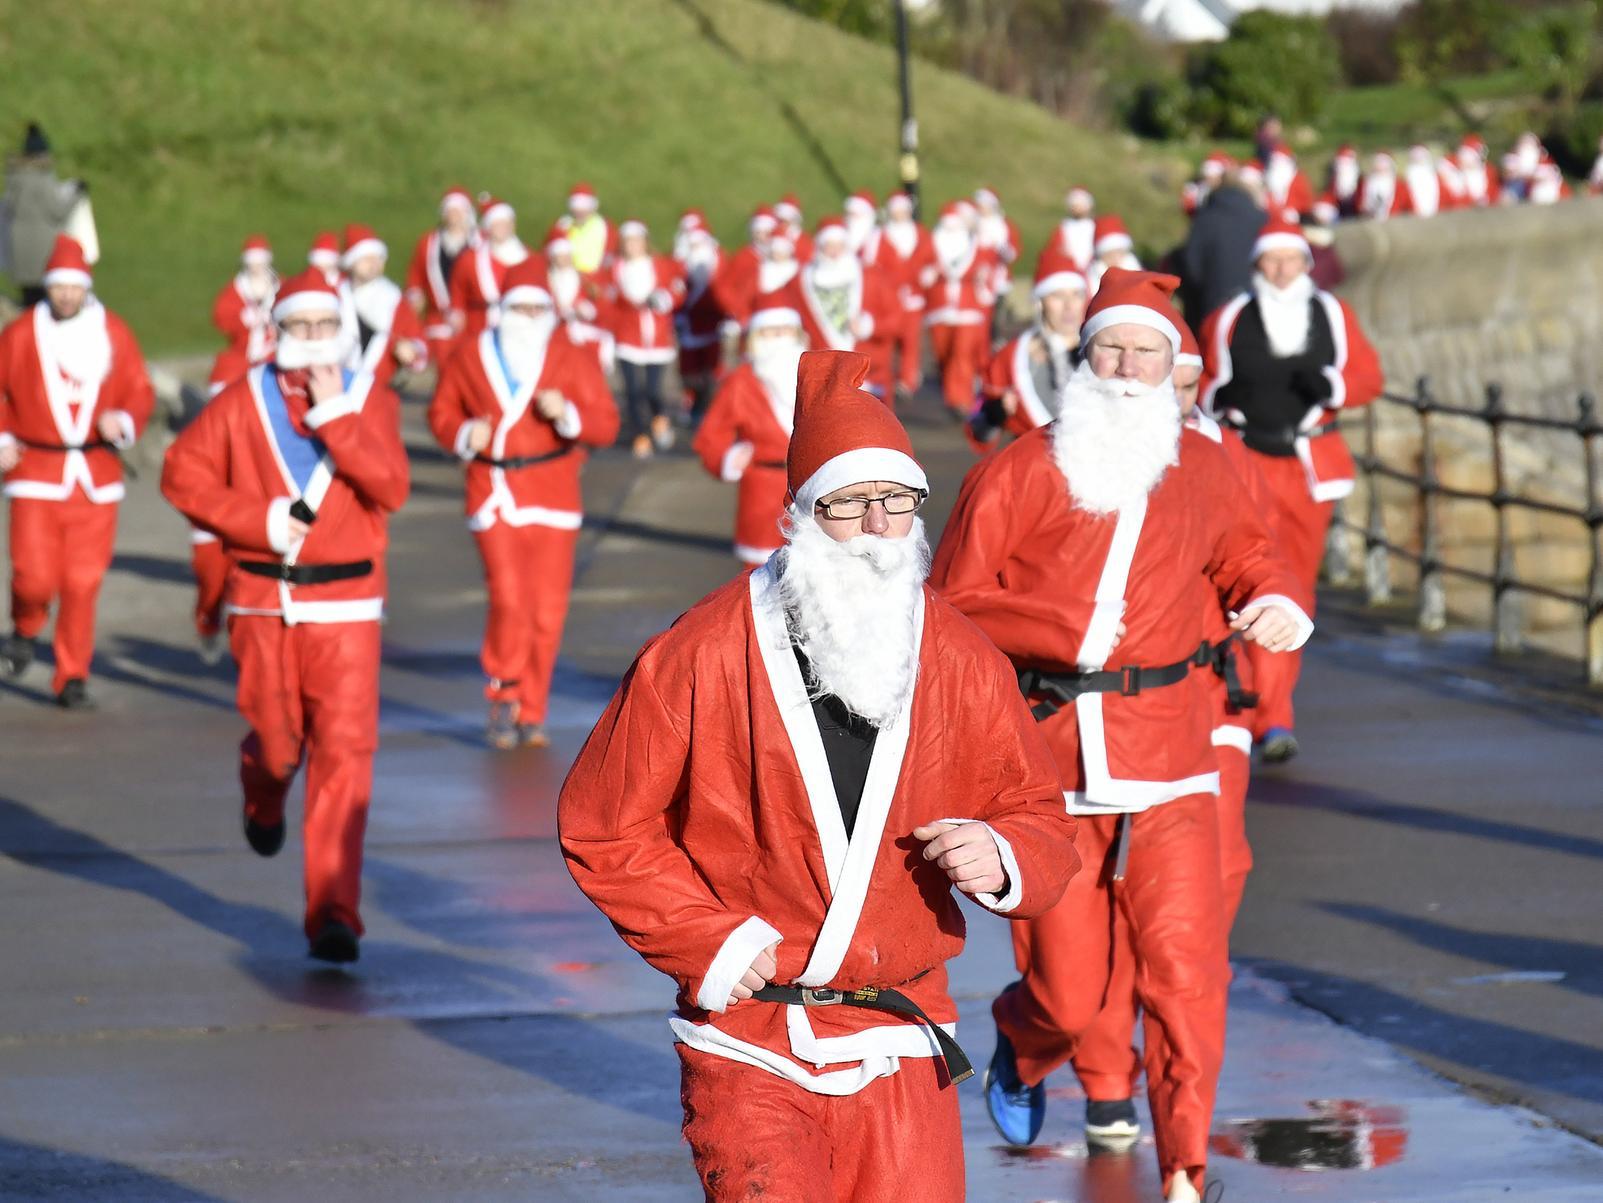 The new version of the traditional Santa Dash takes place on Sunday December 8.